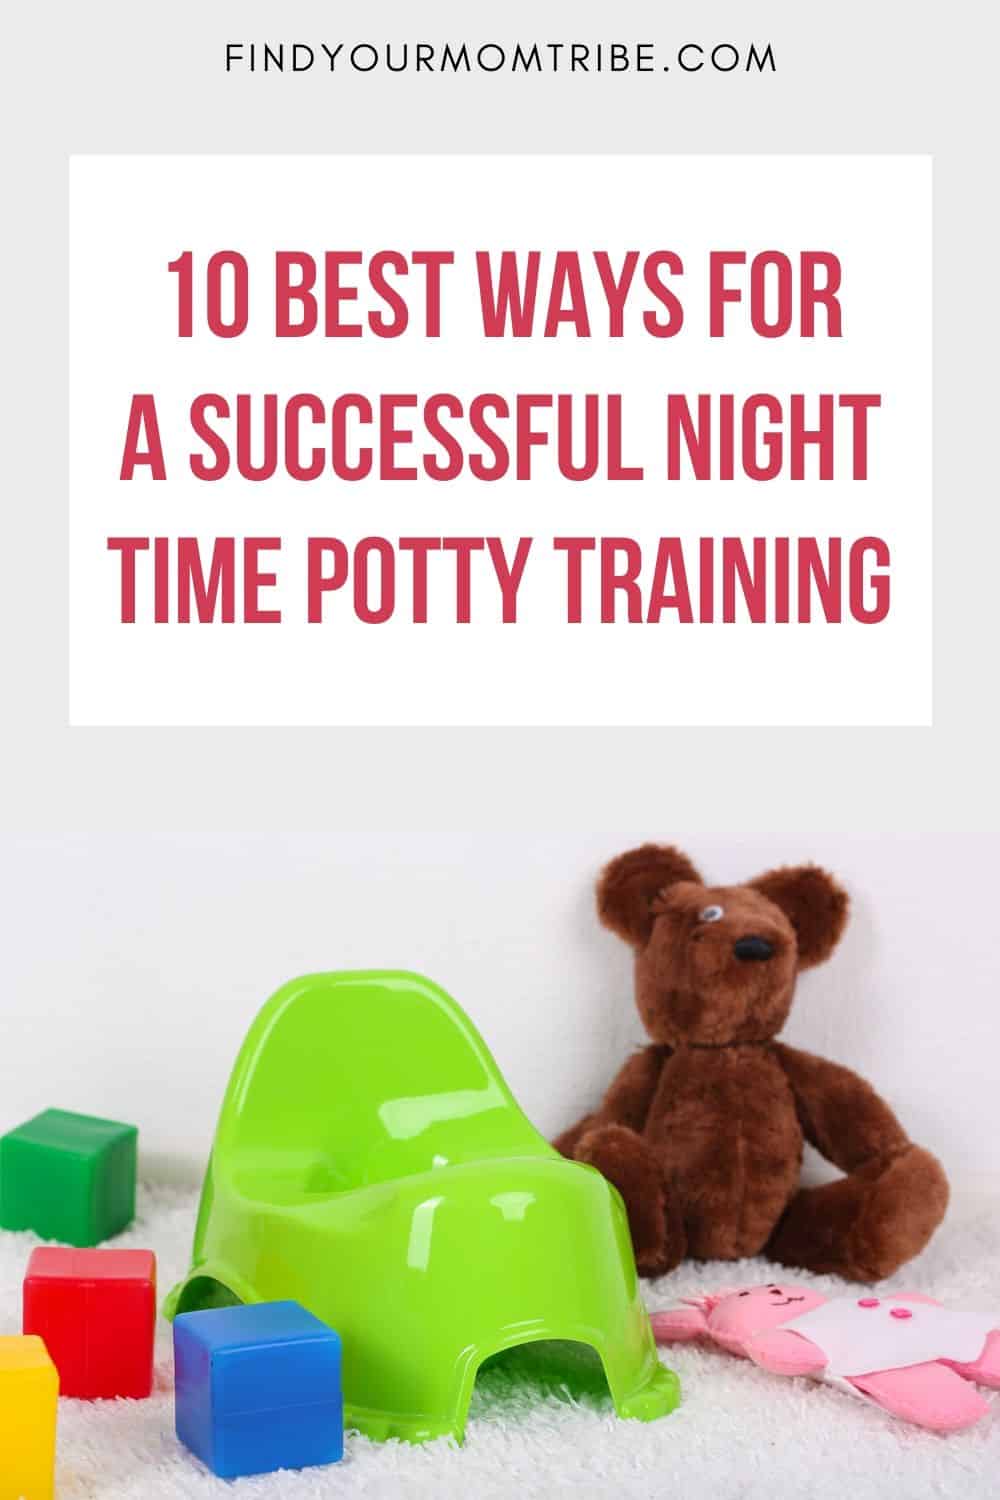 10 Best Ways For A Successful Night Time Potty Training Pinterest